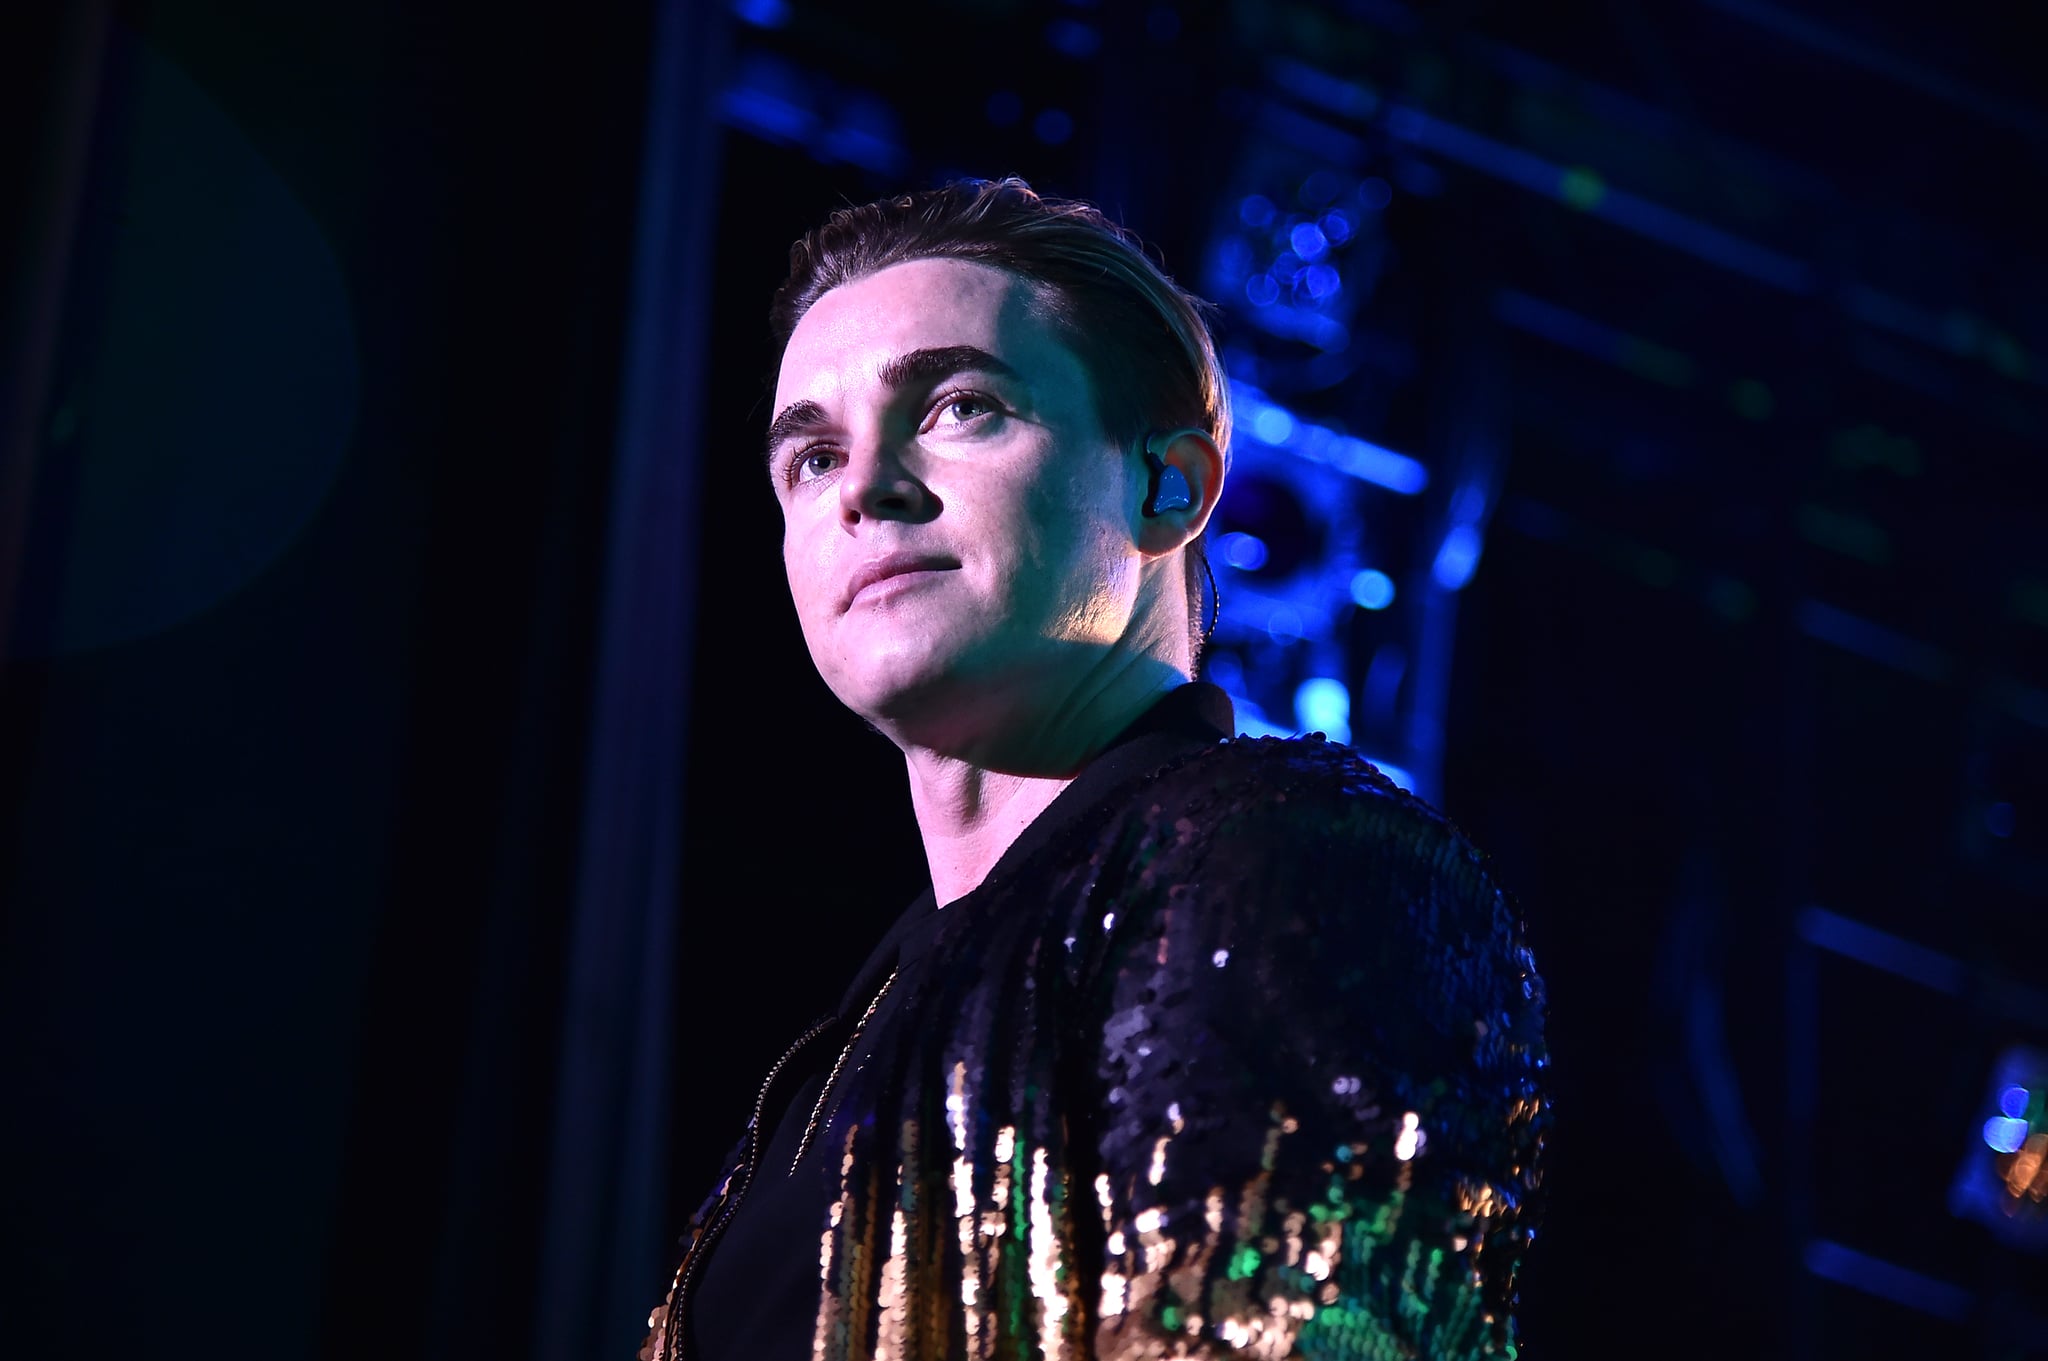 NEW YORK, NEW YORK - JANUARY 21: Jesse McCartney performs at PlayStation Theater on January 21, 2019 in New York City. (Photo by Theo Wargo/Getty Images)